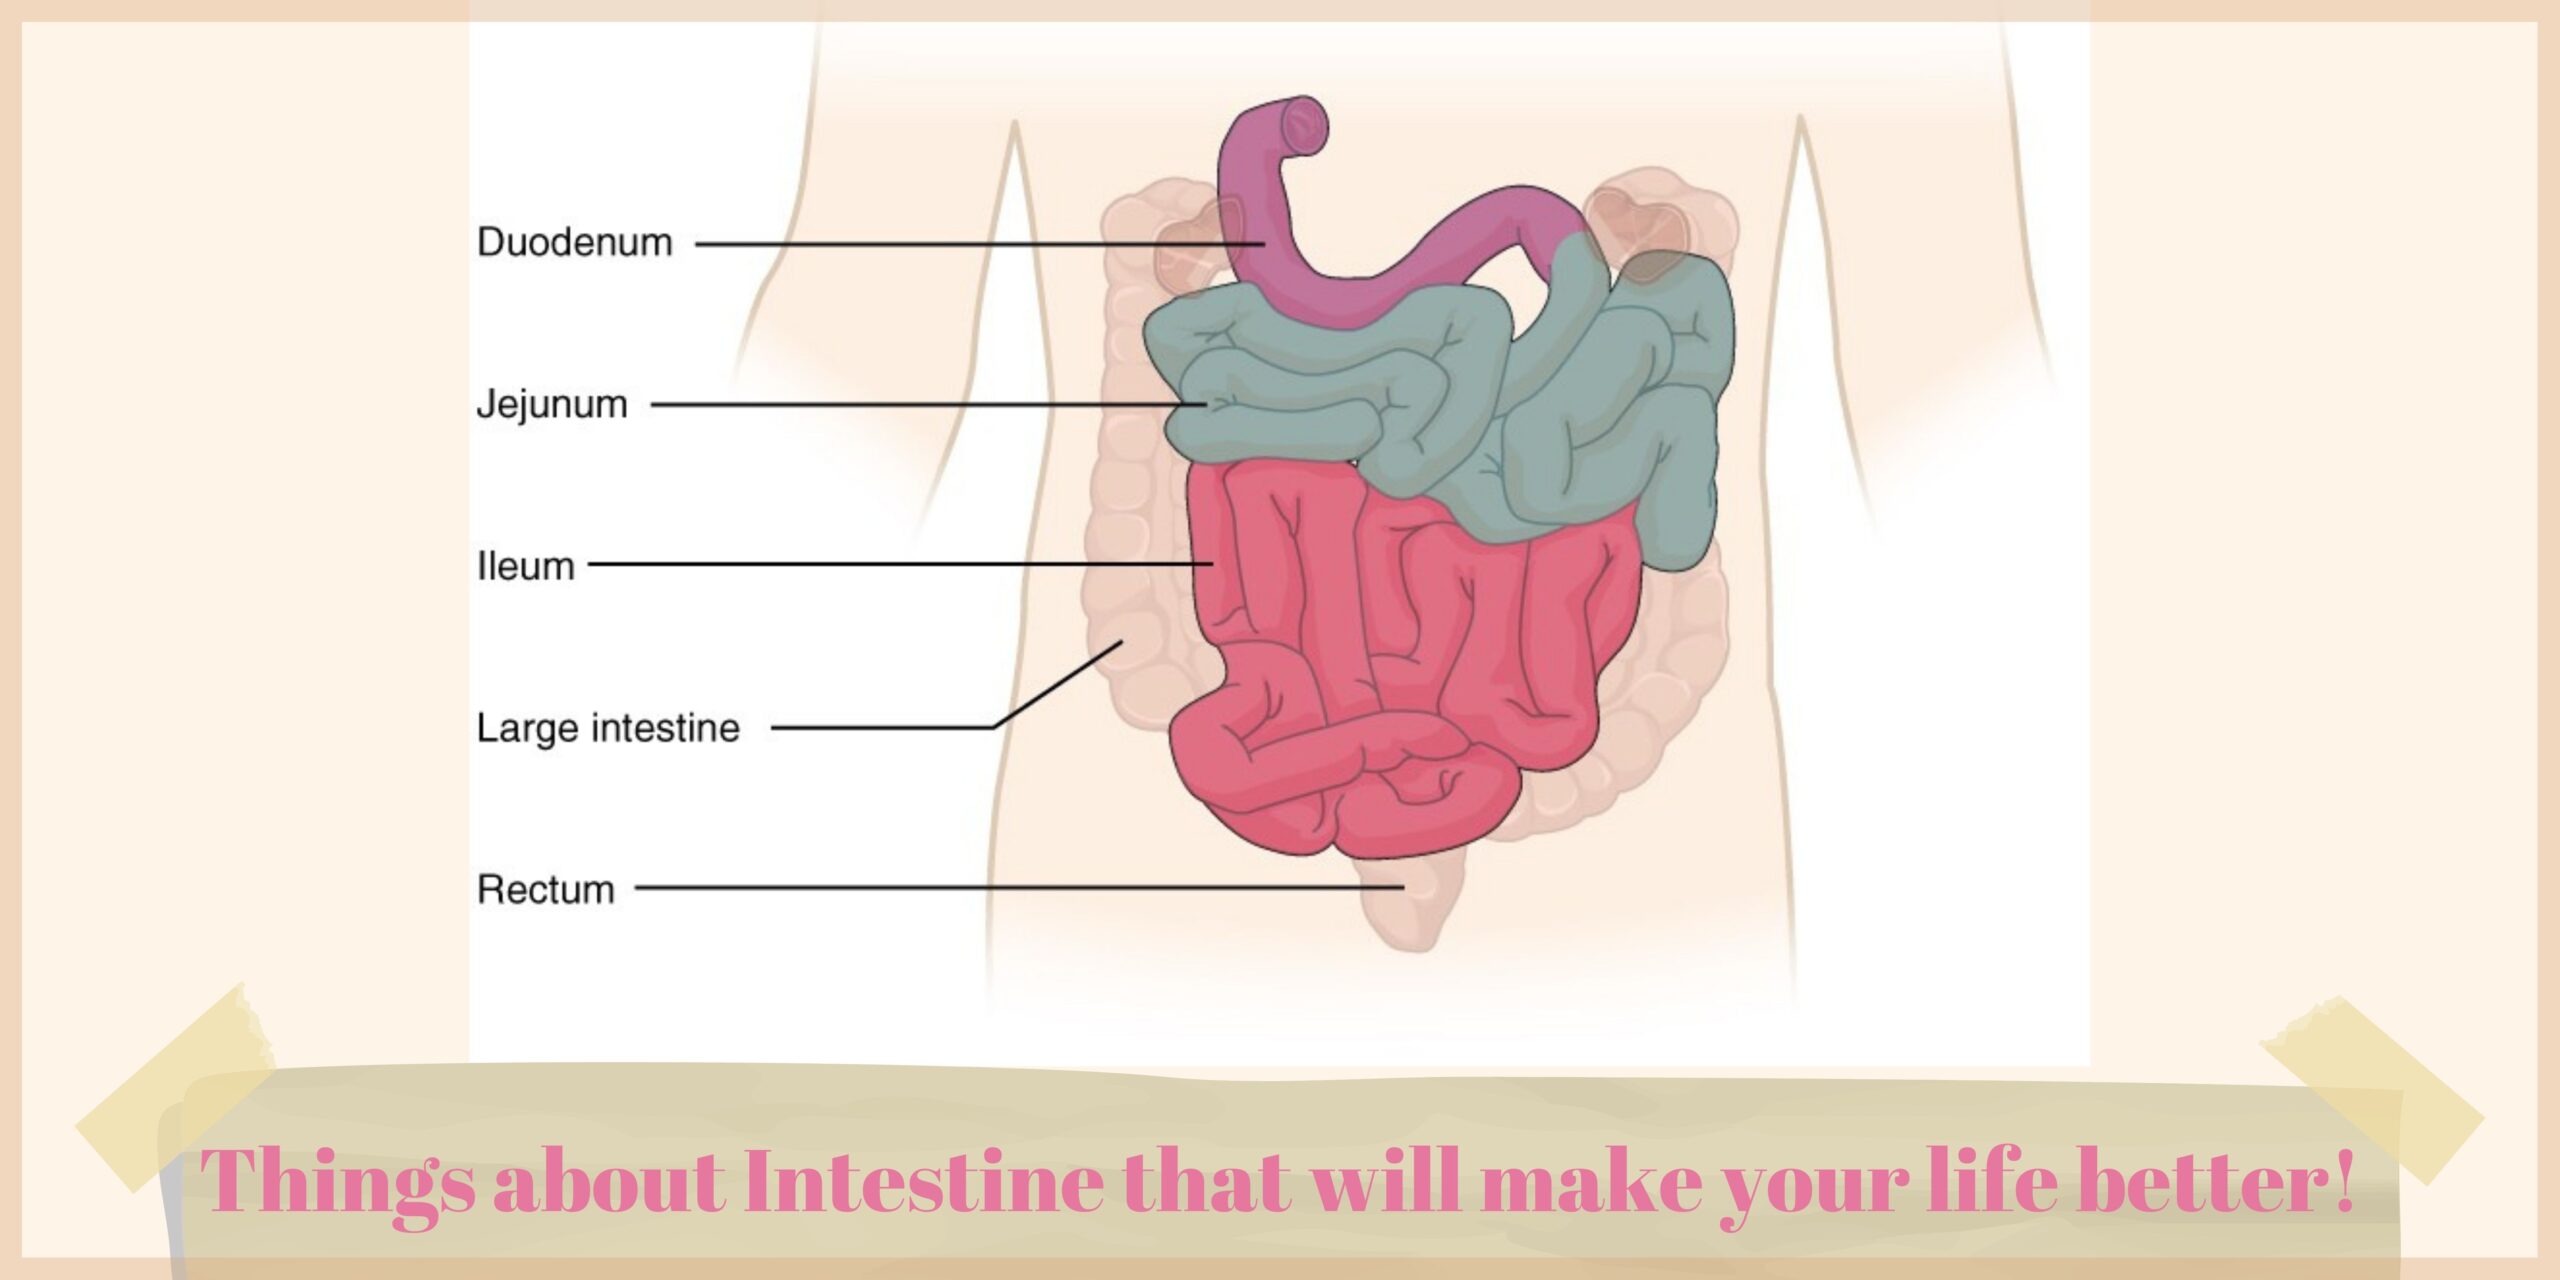 Things about Intestine that will make your life better